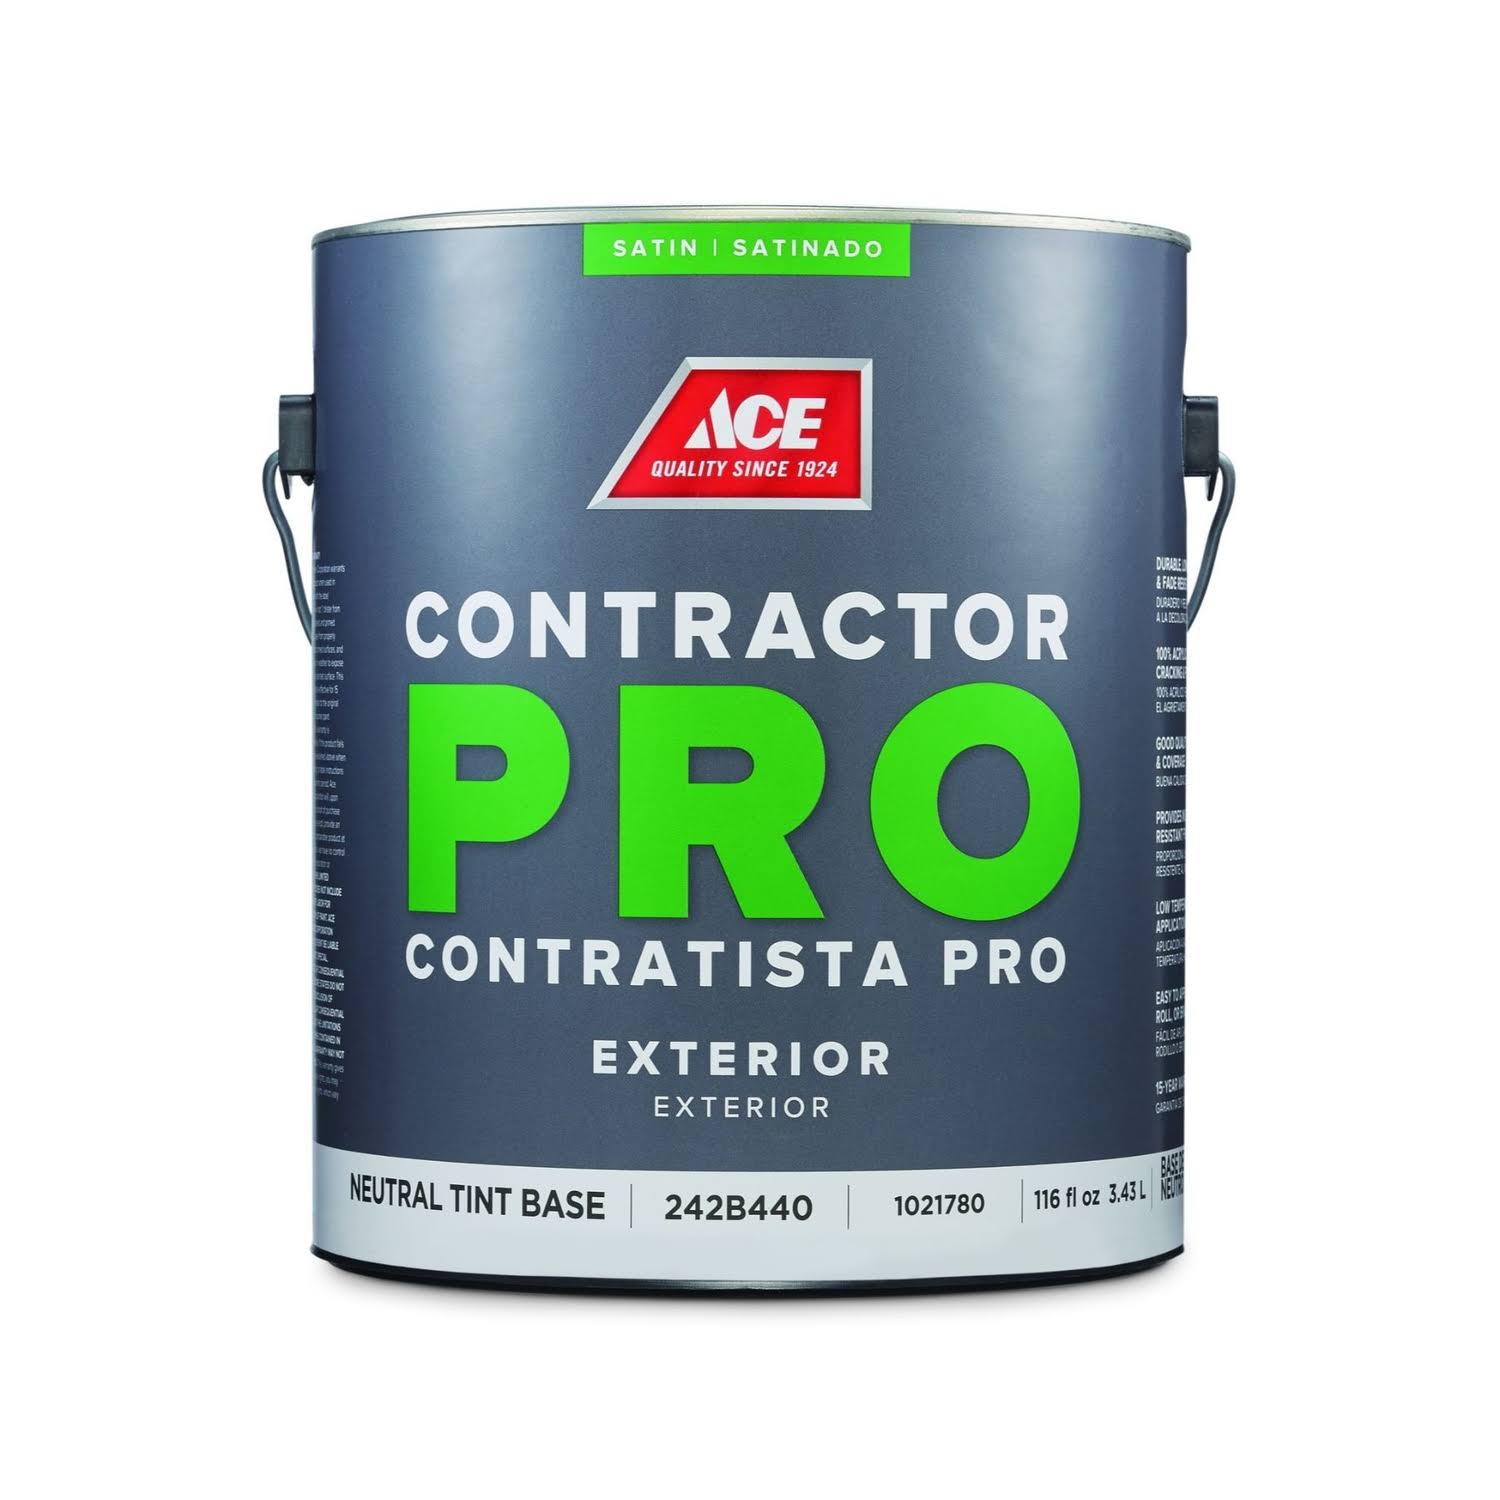 Ace Contractor Pro Satin Tint Base Neutral Base Acrylic Latex Paint Exterior 1 gal.